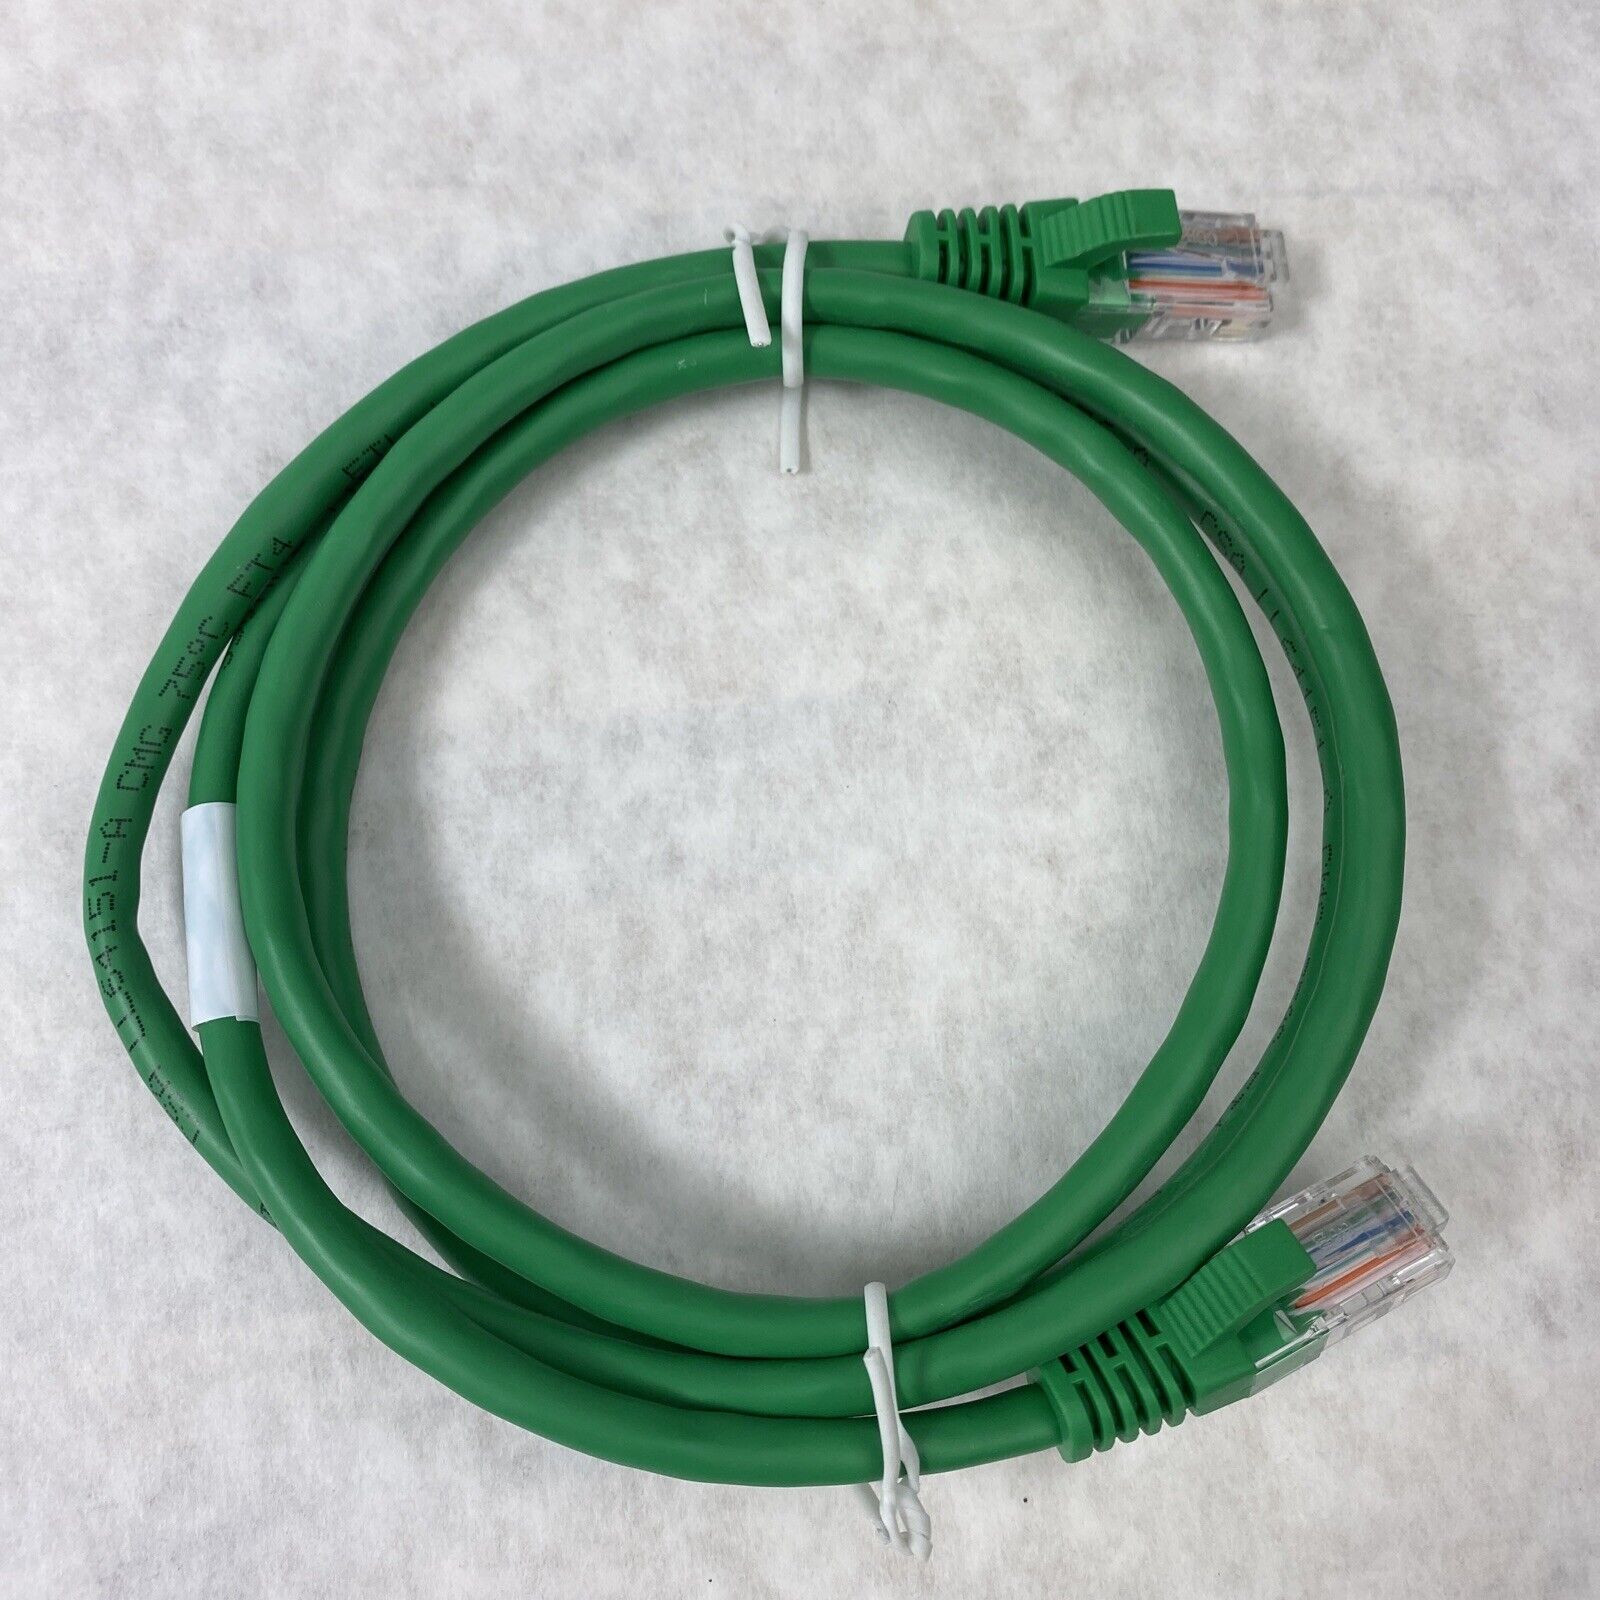 Lot( 5 ) 4ft Green Cat5e C2G 0041 Snagless Unshielded UTP Ethernet Patch Cable